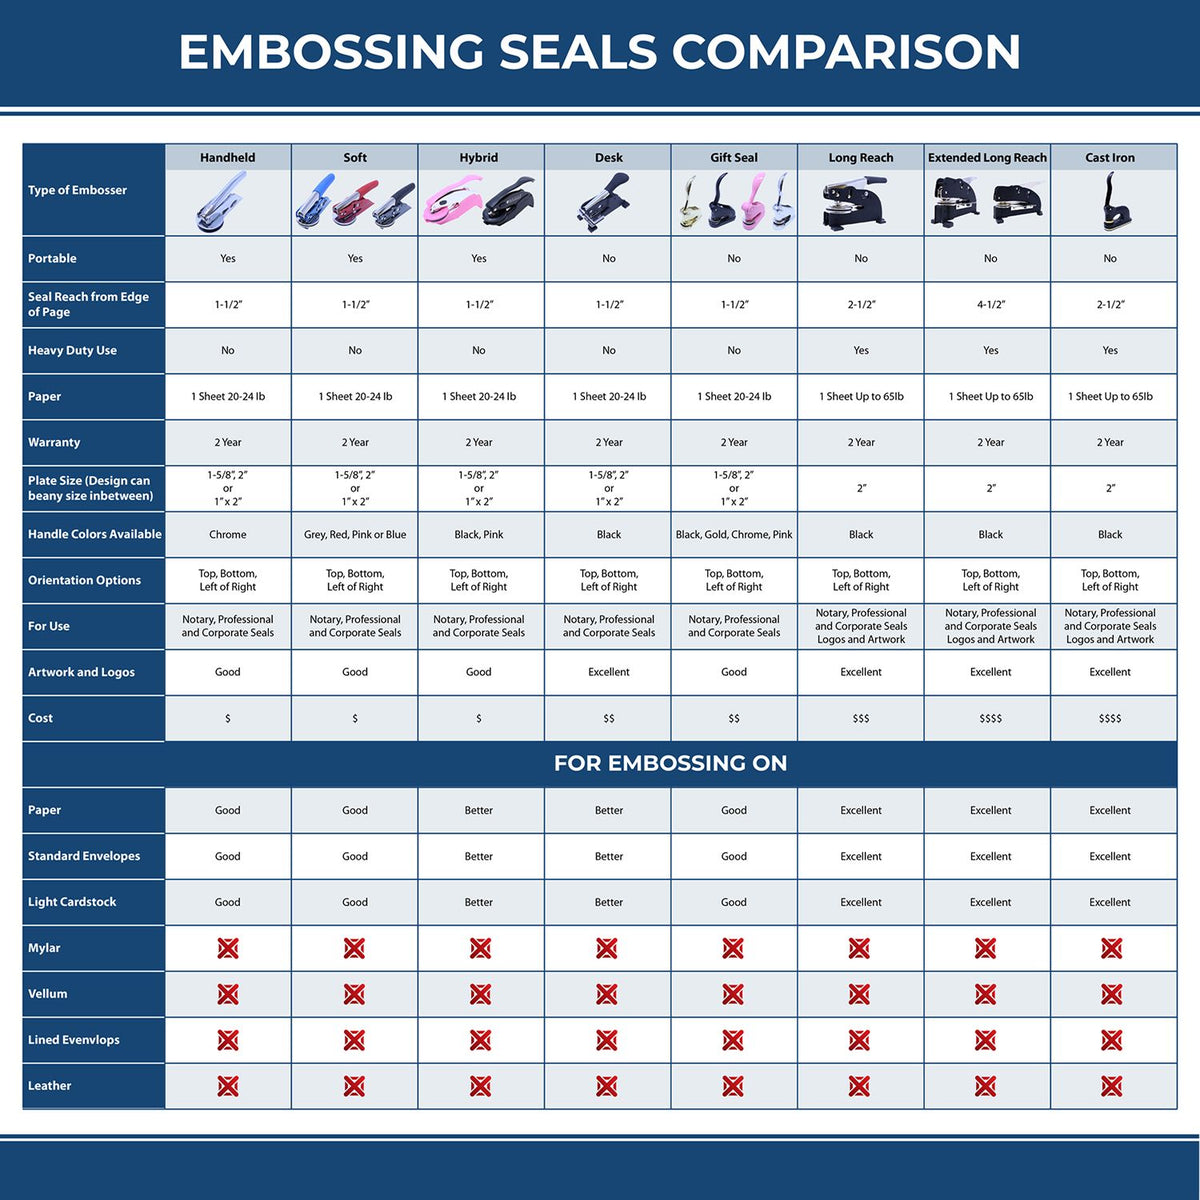 A comparison chart for the different types of mount models available for the State of New Hampshire Extended Long Reach Geologist Seal